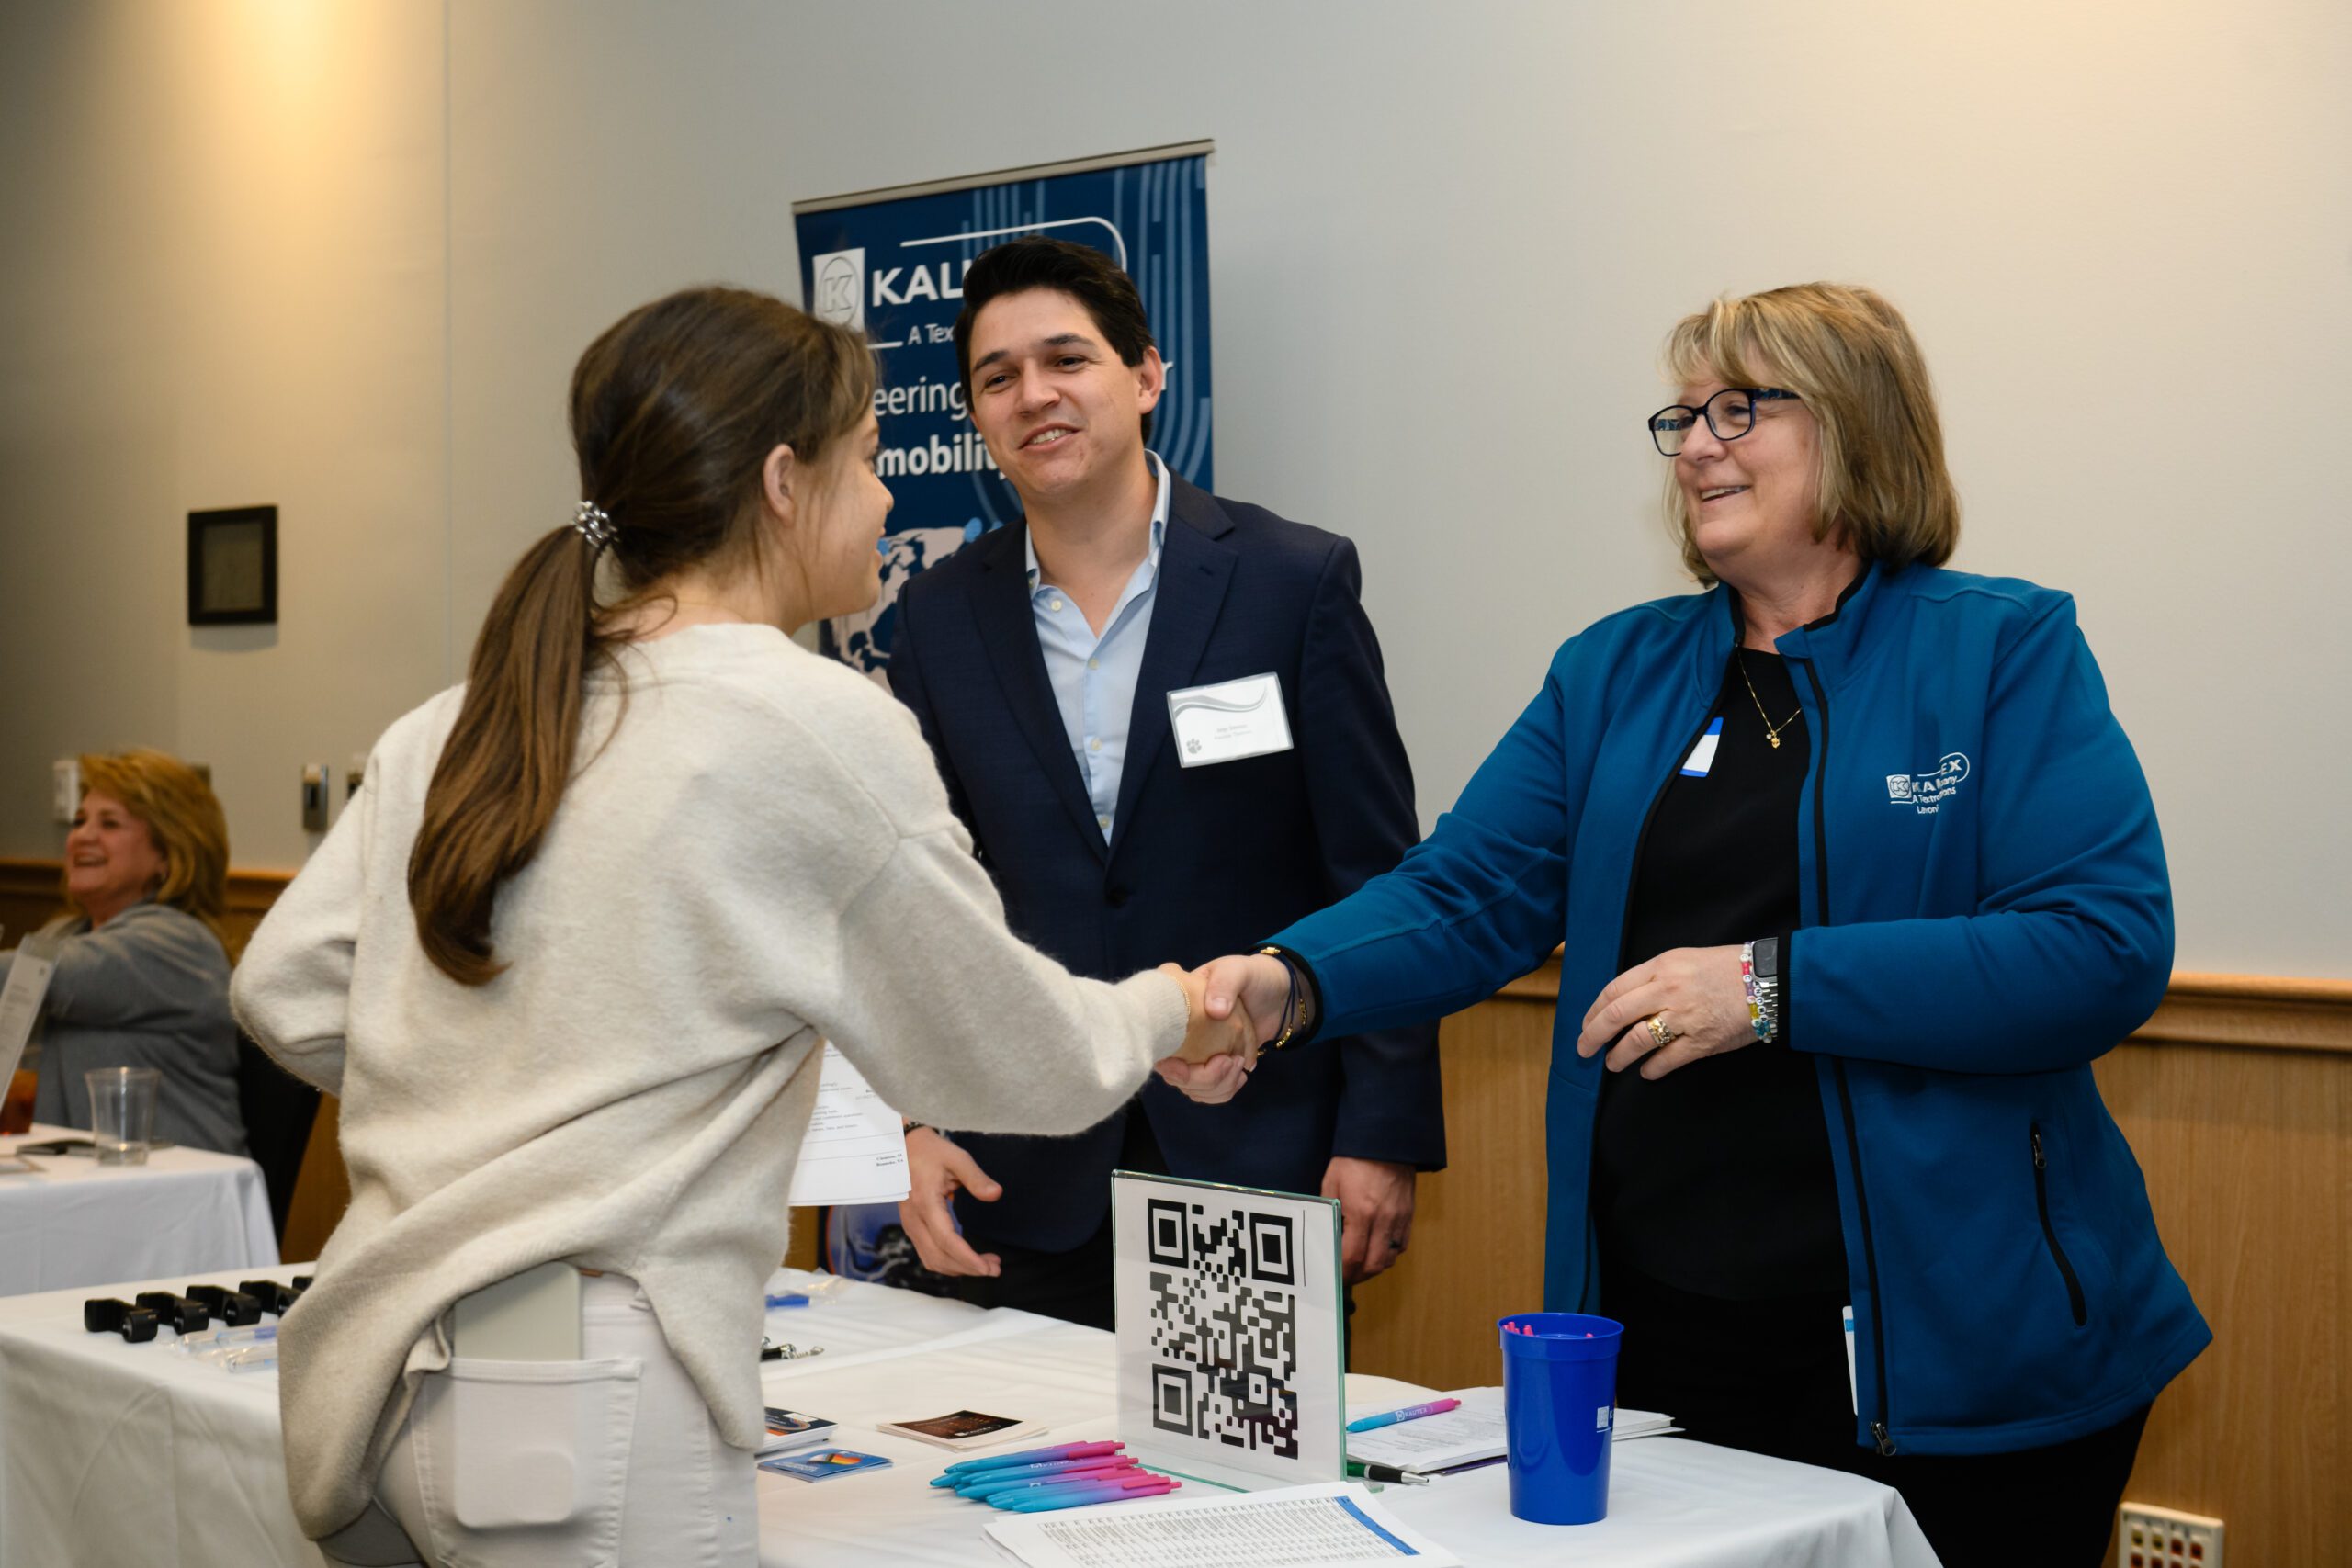 A student shakes the hand of a business person at a recent conference in the Hendrix Student Center.